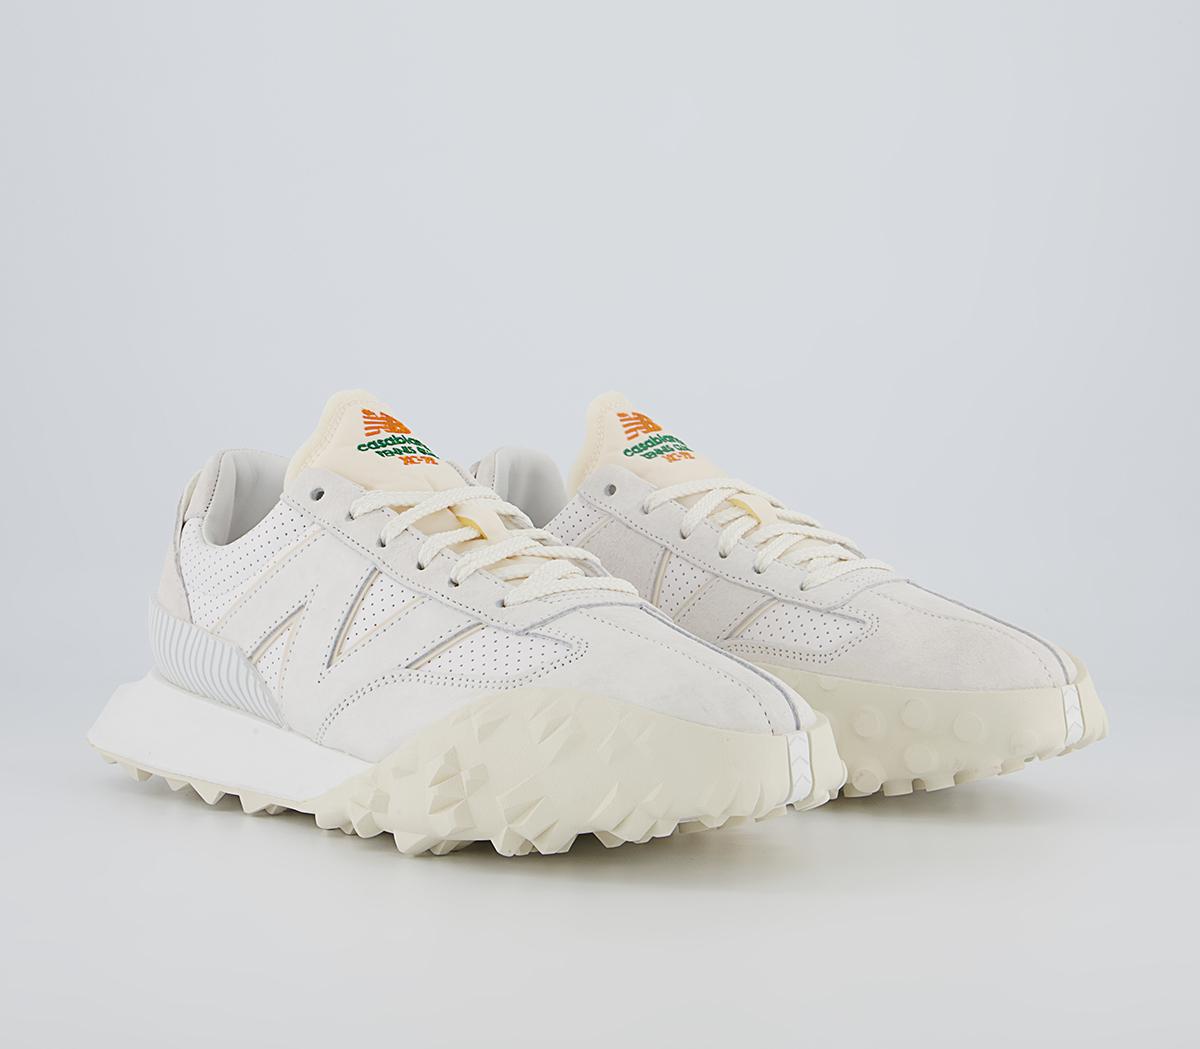 New Balance XC72 Trainers Casablanca White - His trainers